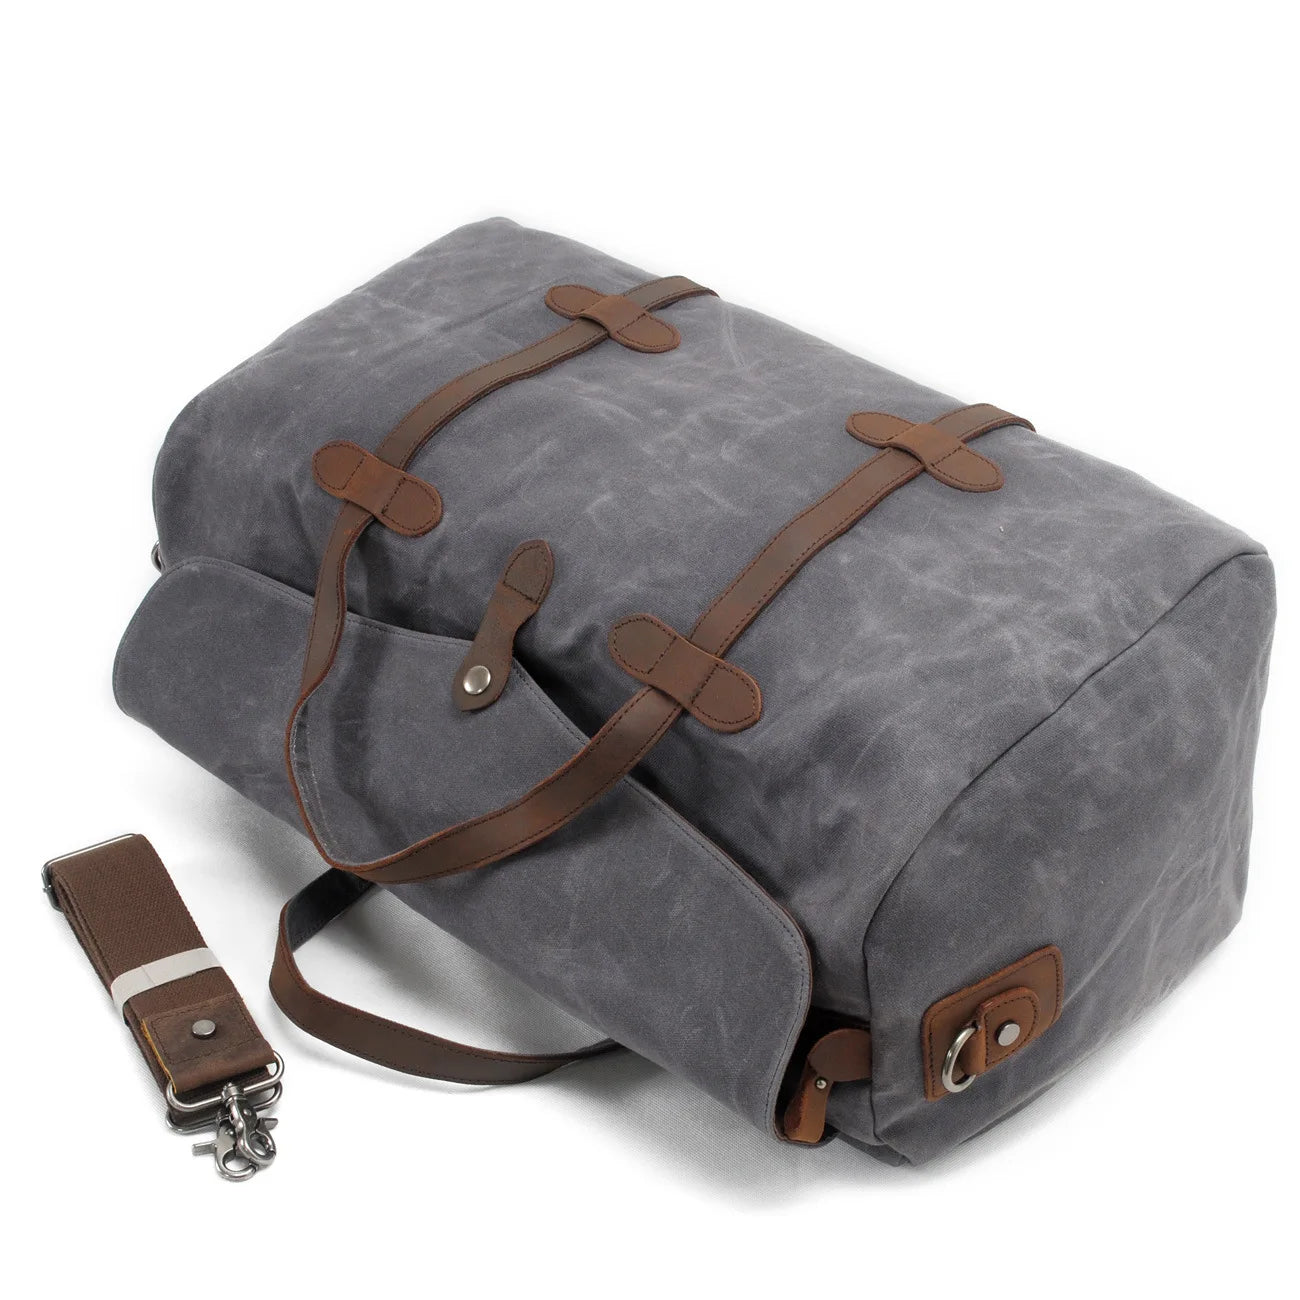 MUCHUAN Vintage Pure Cotton Canvas Leather Travel Duffle Bags Large Capacity Weekend Bag Overnight Bag Men Hand Luggage Big